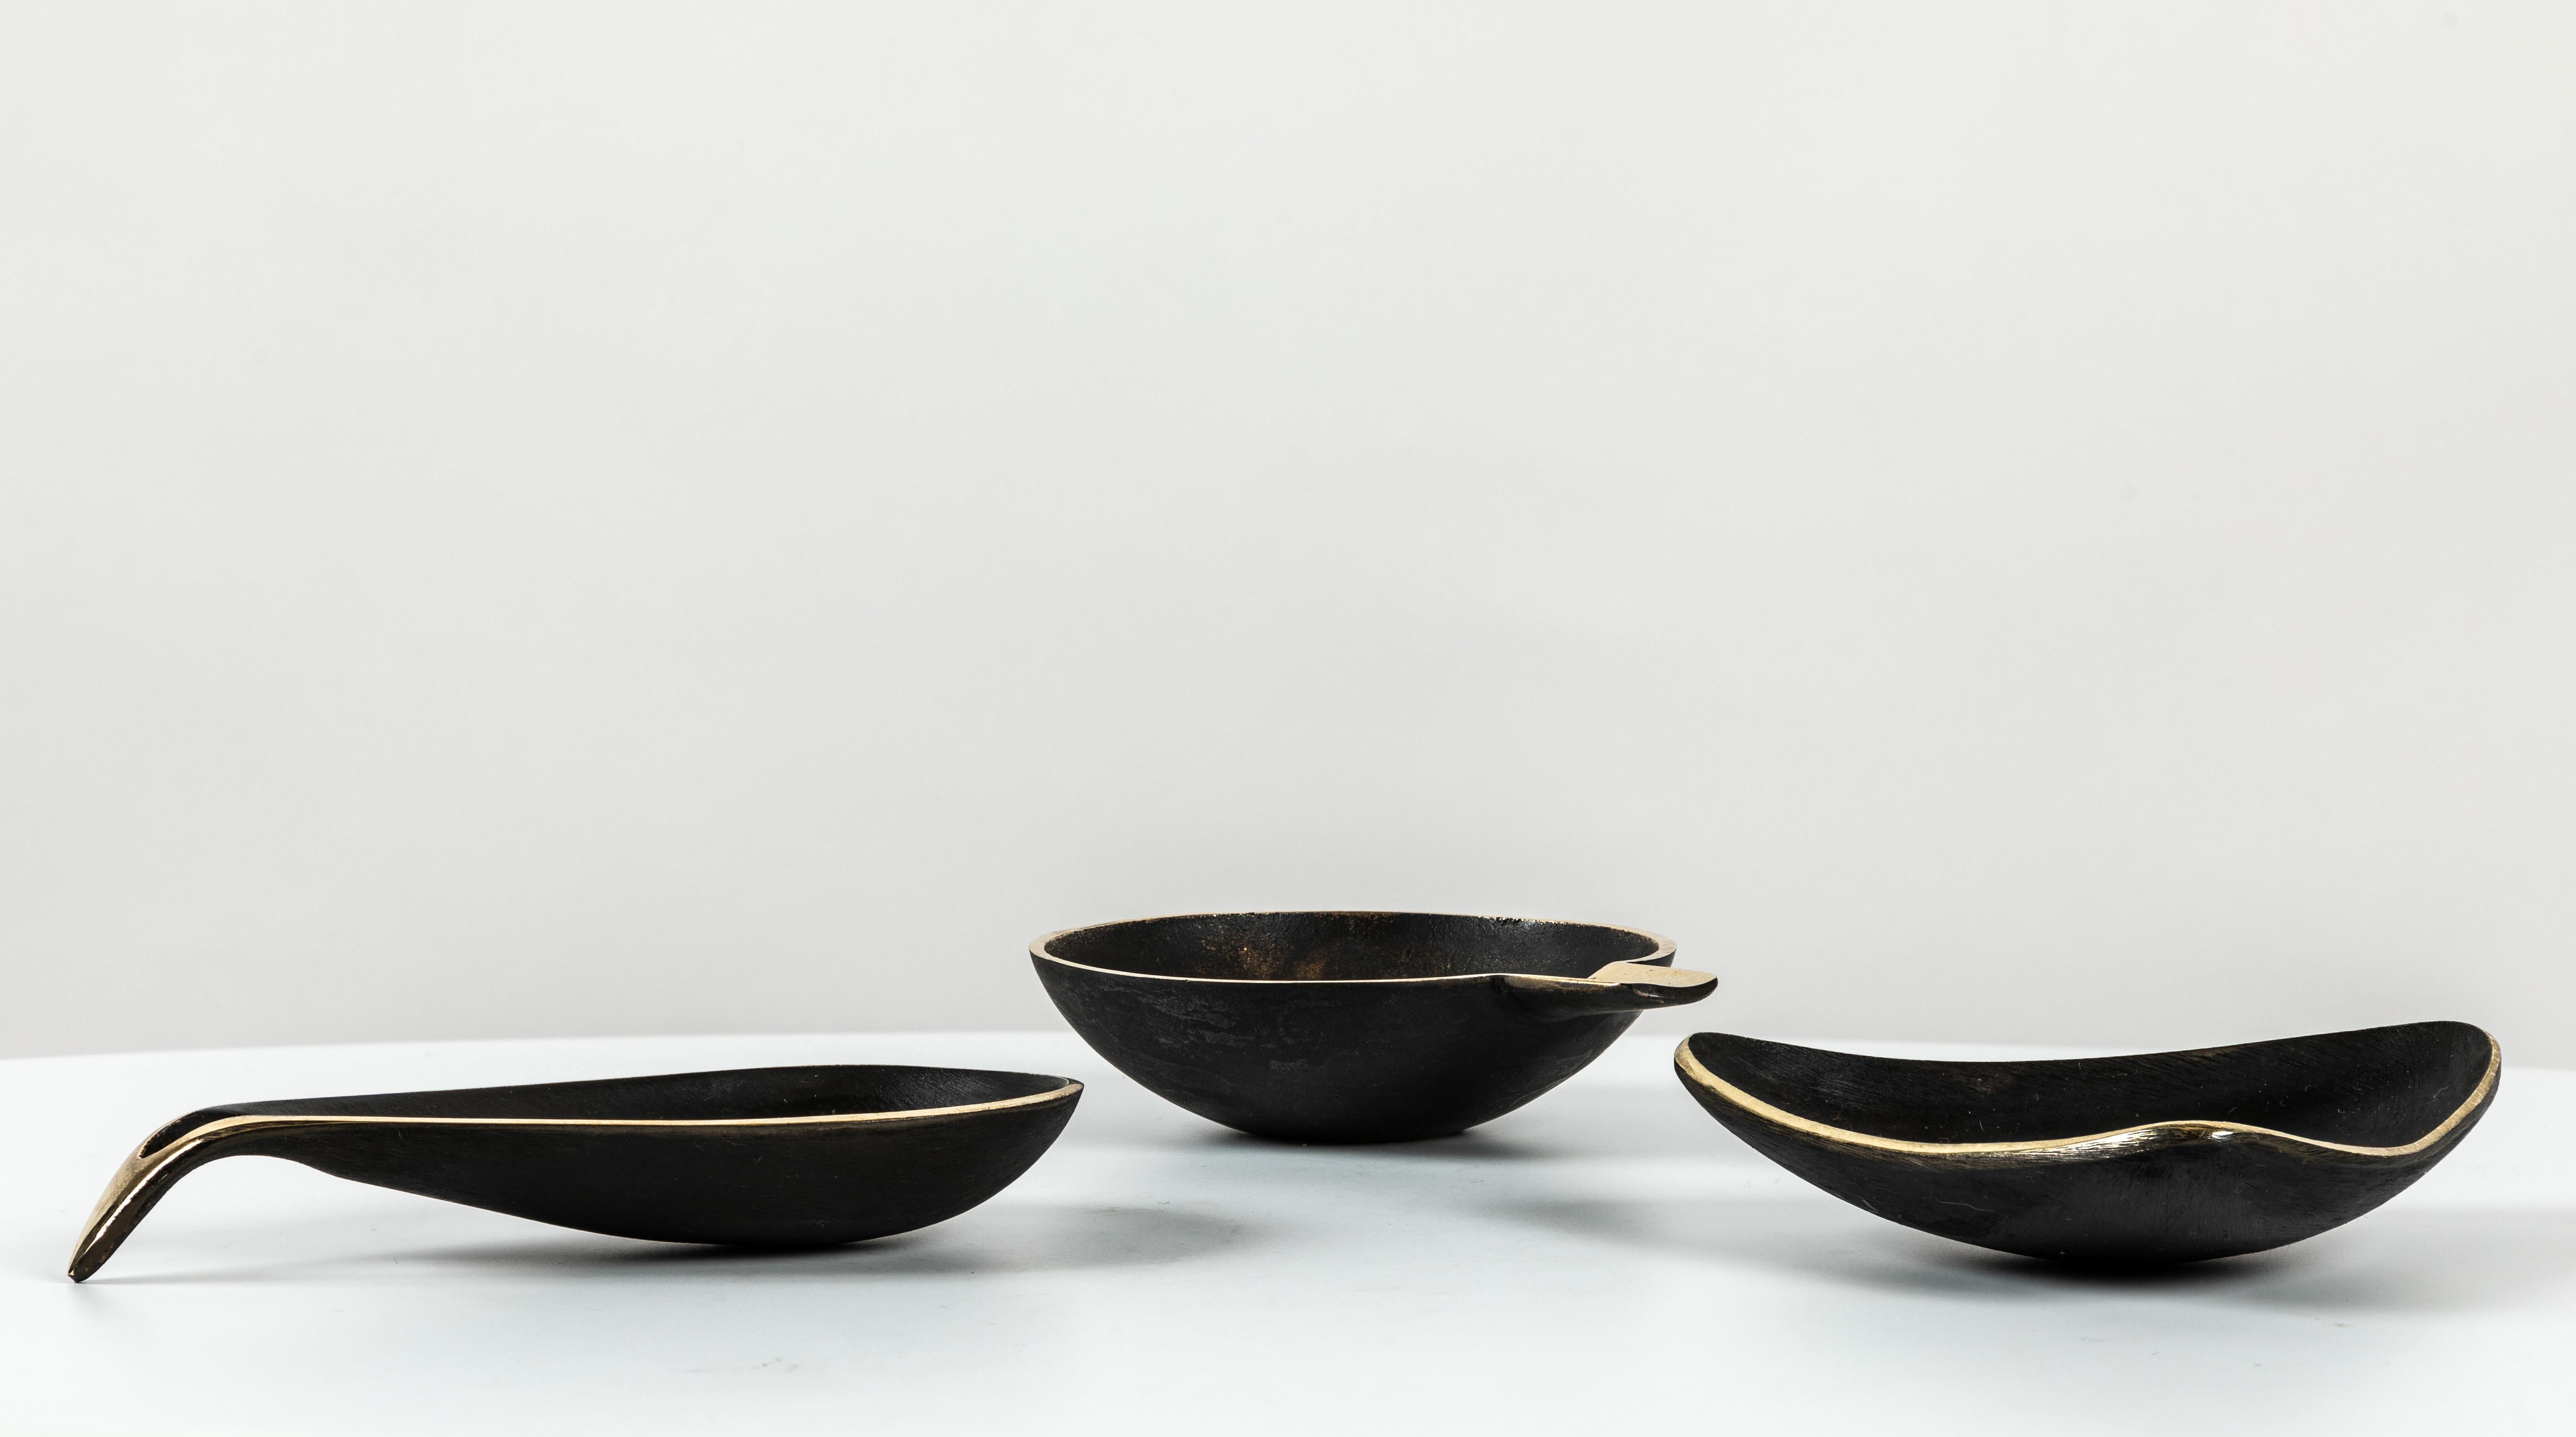 Set of three Carl Auböck brass bowls. Includes one each of Models #3904, #3844 & #4082. Designed in the 1950s, these incredibly refined and sculptural Viennese bowls are executed in polished and darkly patinated brass. Originally conceived as an